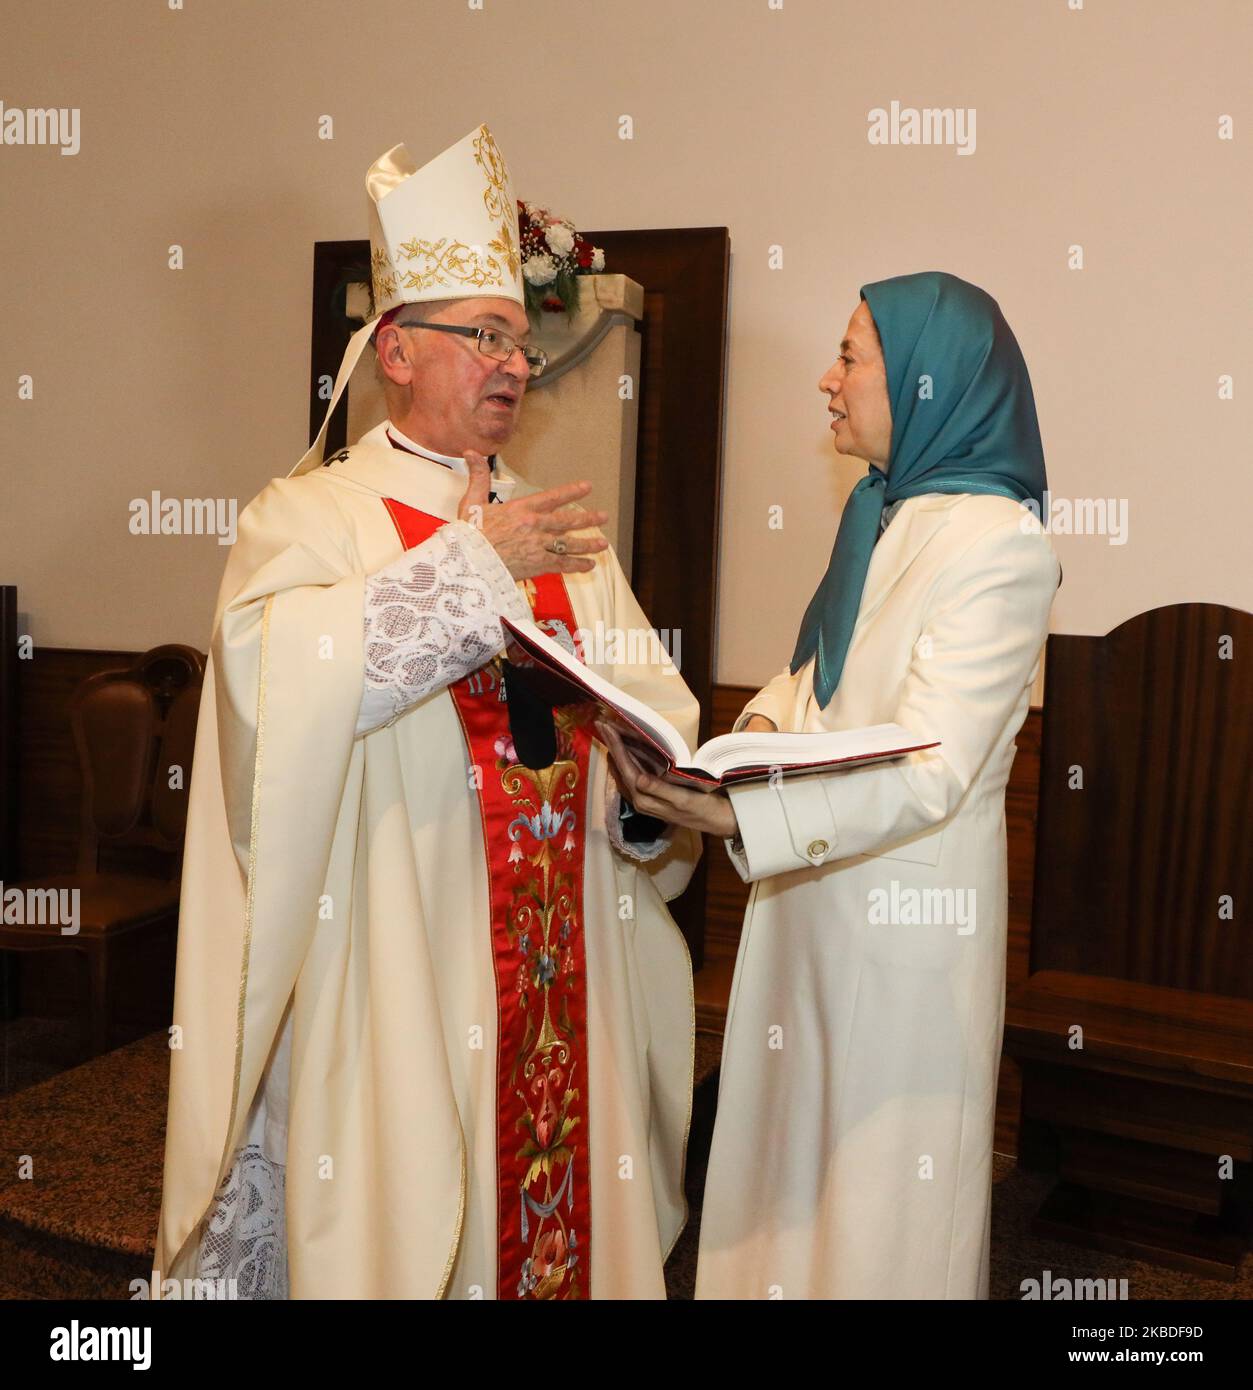 Maryam Rajavi, the President-elect of the National Council of Resistance of Iran (NCRI) and George Antonio Frendo, Archbishop of Tirana and Duress, on December 25, 2019 in Tirana. She presenting a book containing the list of names of 20,000 members of the People's Mojahedin Organization of Iran executed by the Iranian regime, during Christmas celebrations marking the birth of Jesus Christ at the Metropolitan Archdiocese of Tirana- Durres. (Photo by Siavosh Hosseini/NurPhoto) Stock Photo